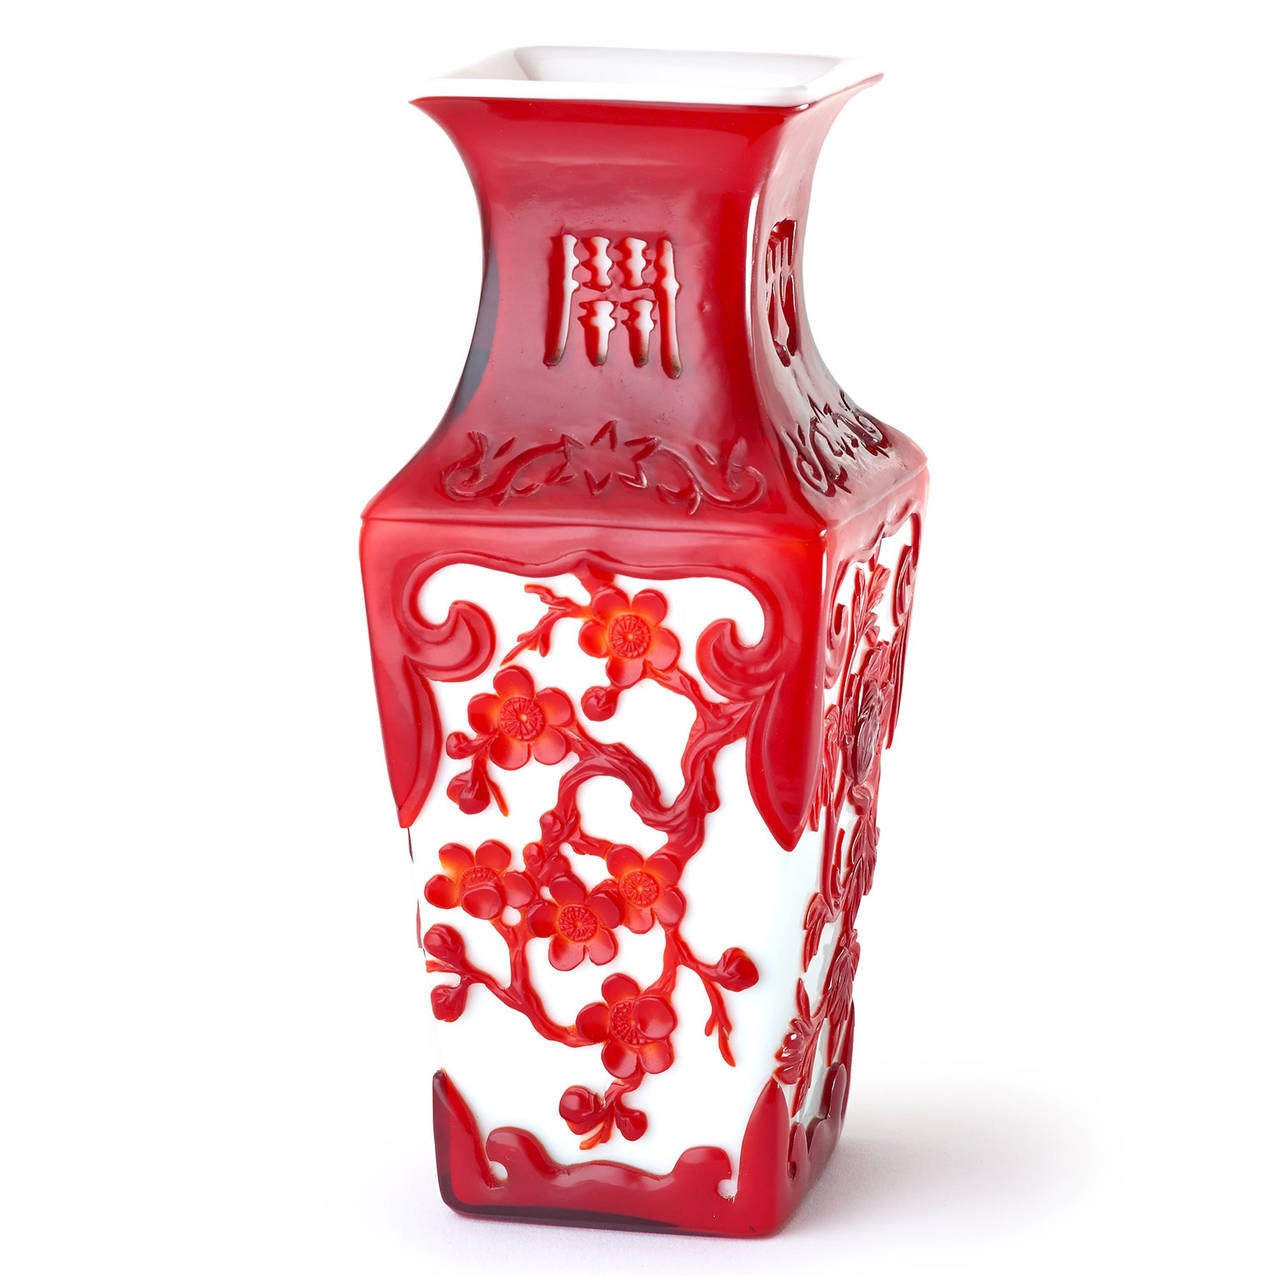 White with red ornaments, every side with another blossoms branch, the neck vase is decorated with luck symbols.